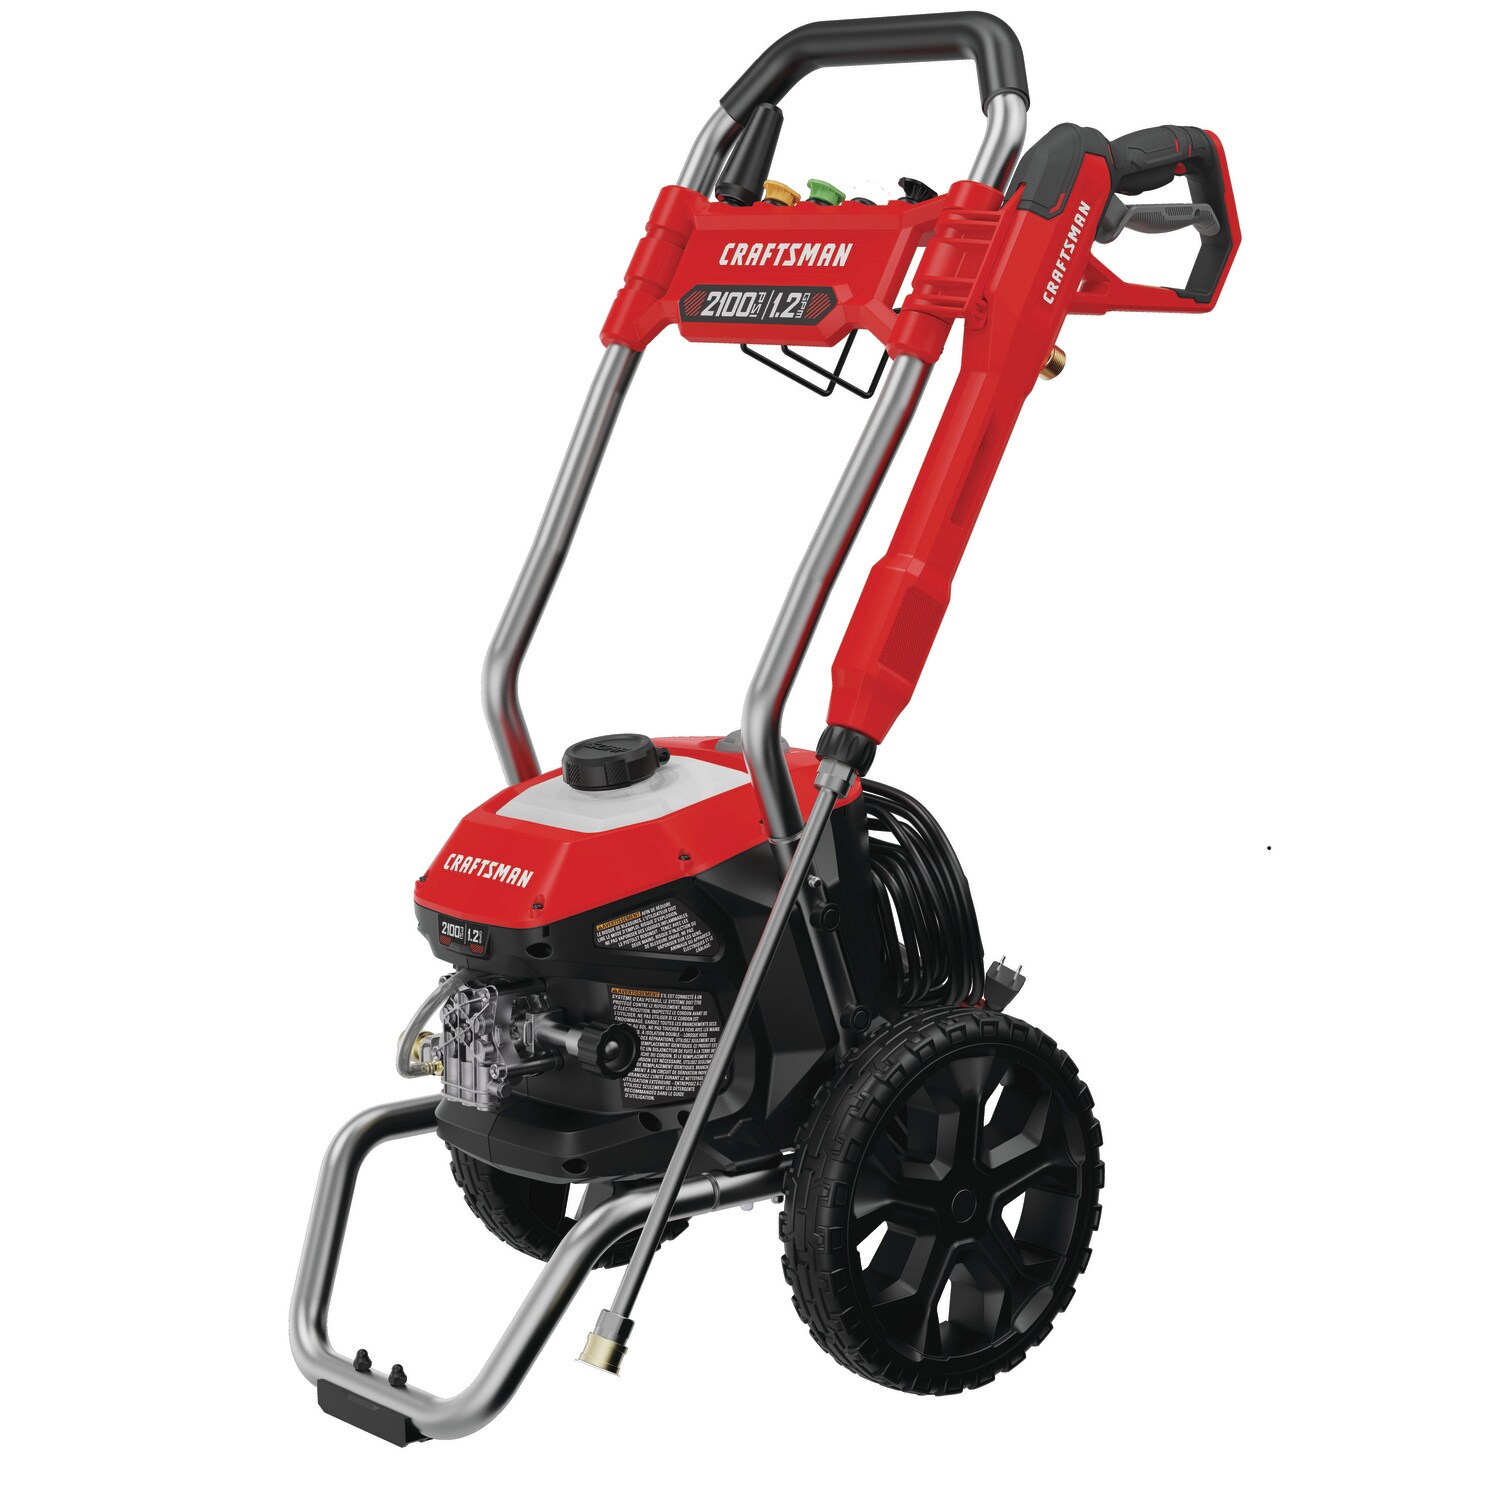 Qualidy Power Washer 4500PSI 3.5GPM Corded Washer Electric Pressure Washer with 5 Quick-Connect Spray Nozzles to Wash Various Surfaces